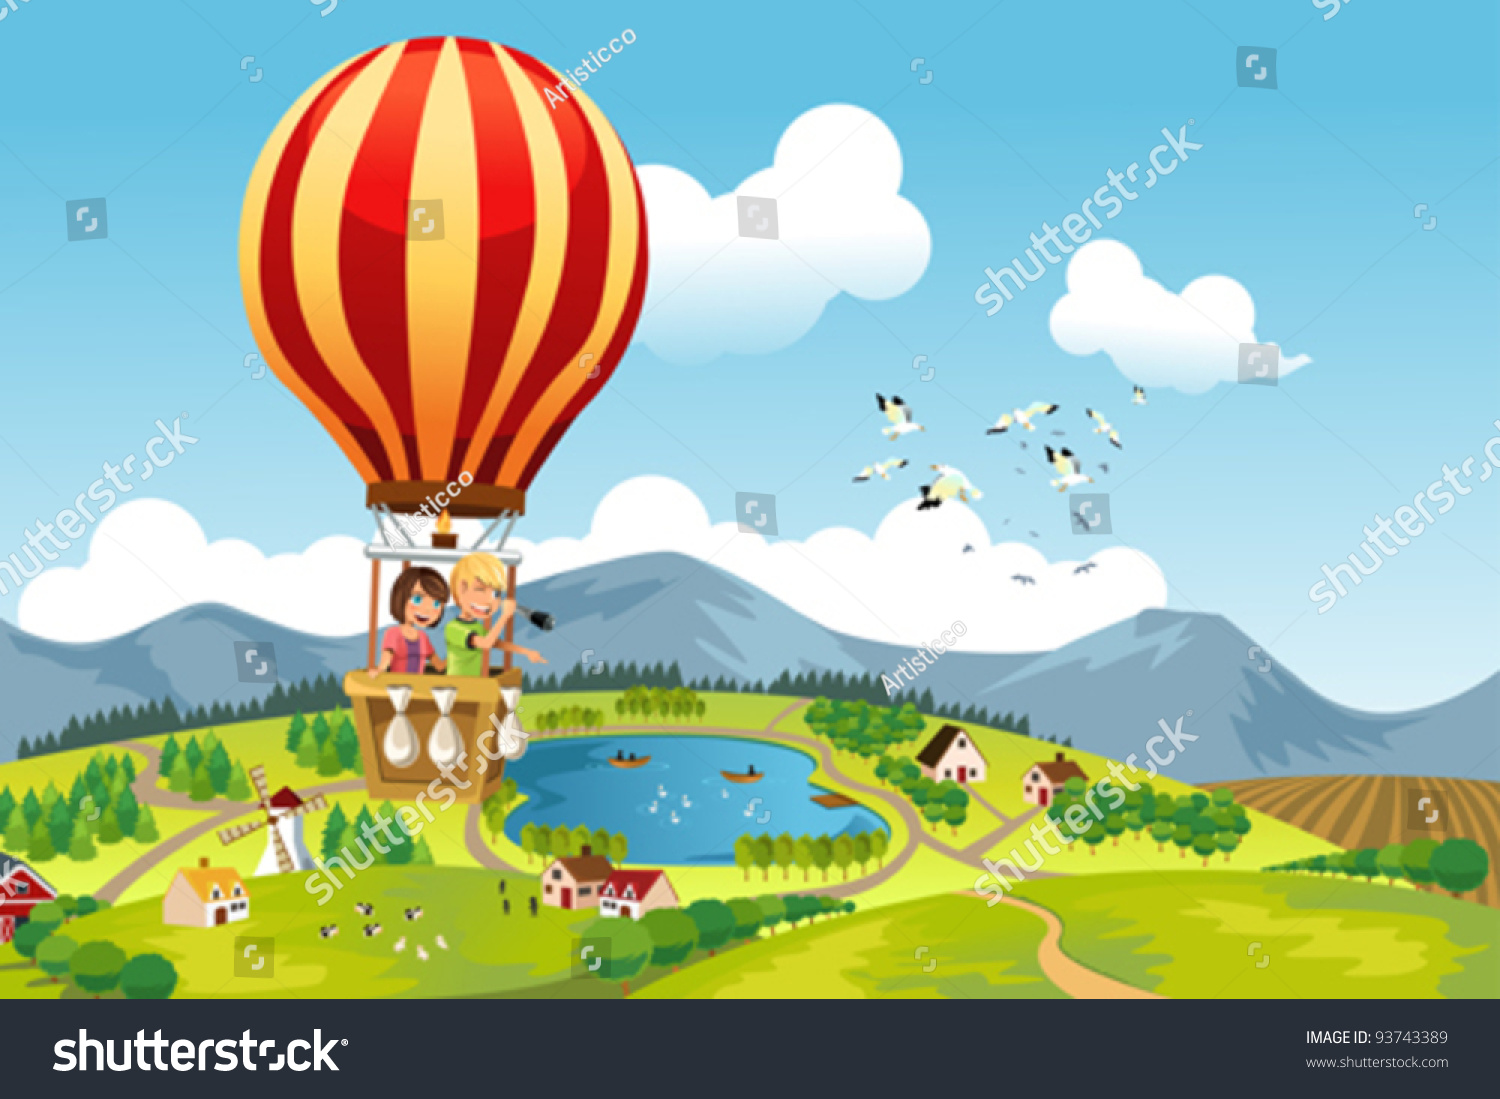 hot air balloon rides for 2 people